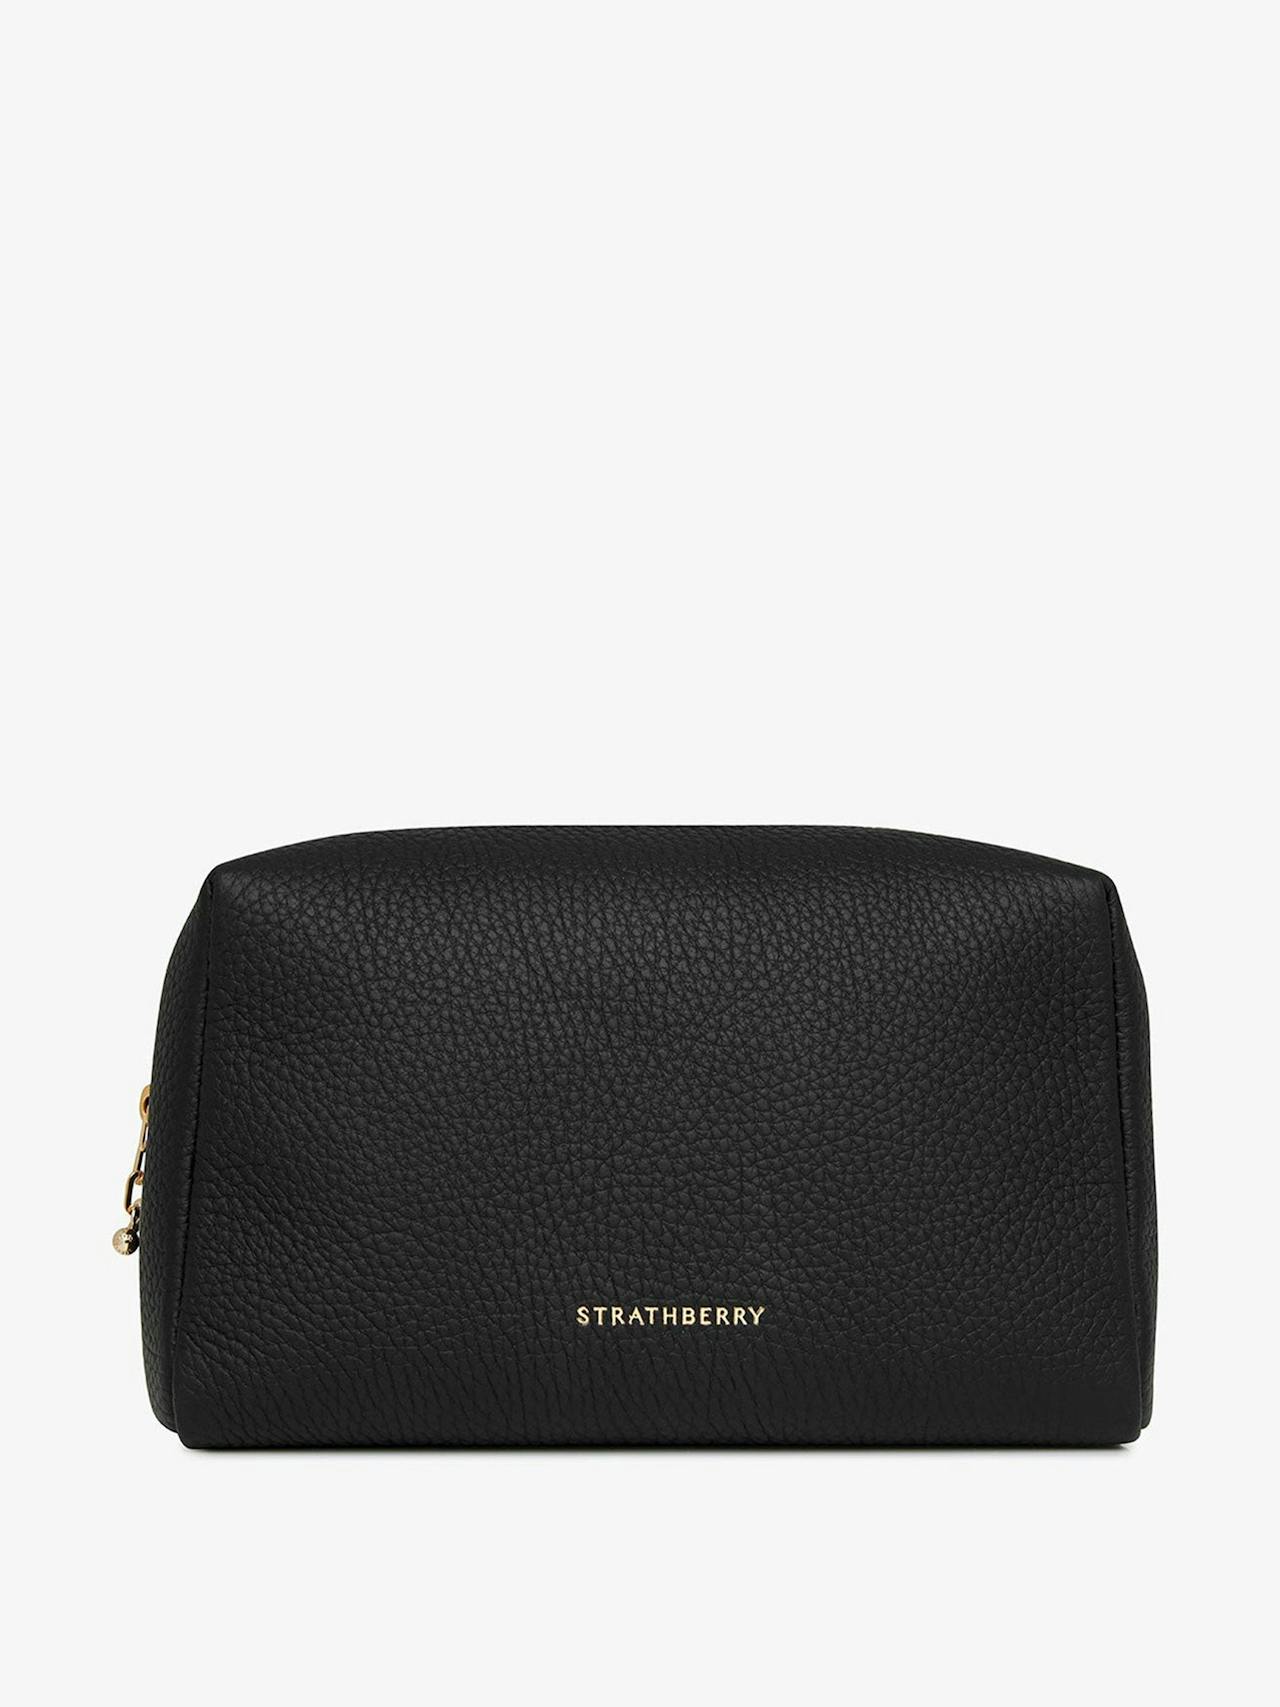 Black cosmetic pouch